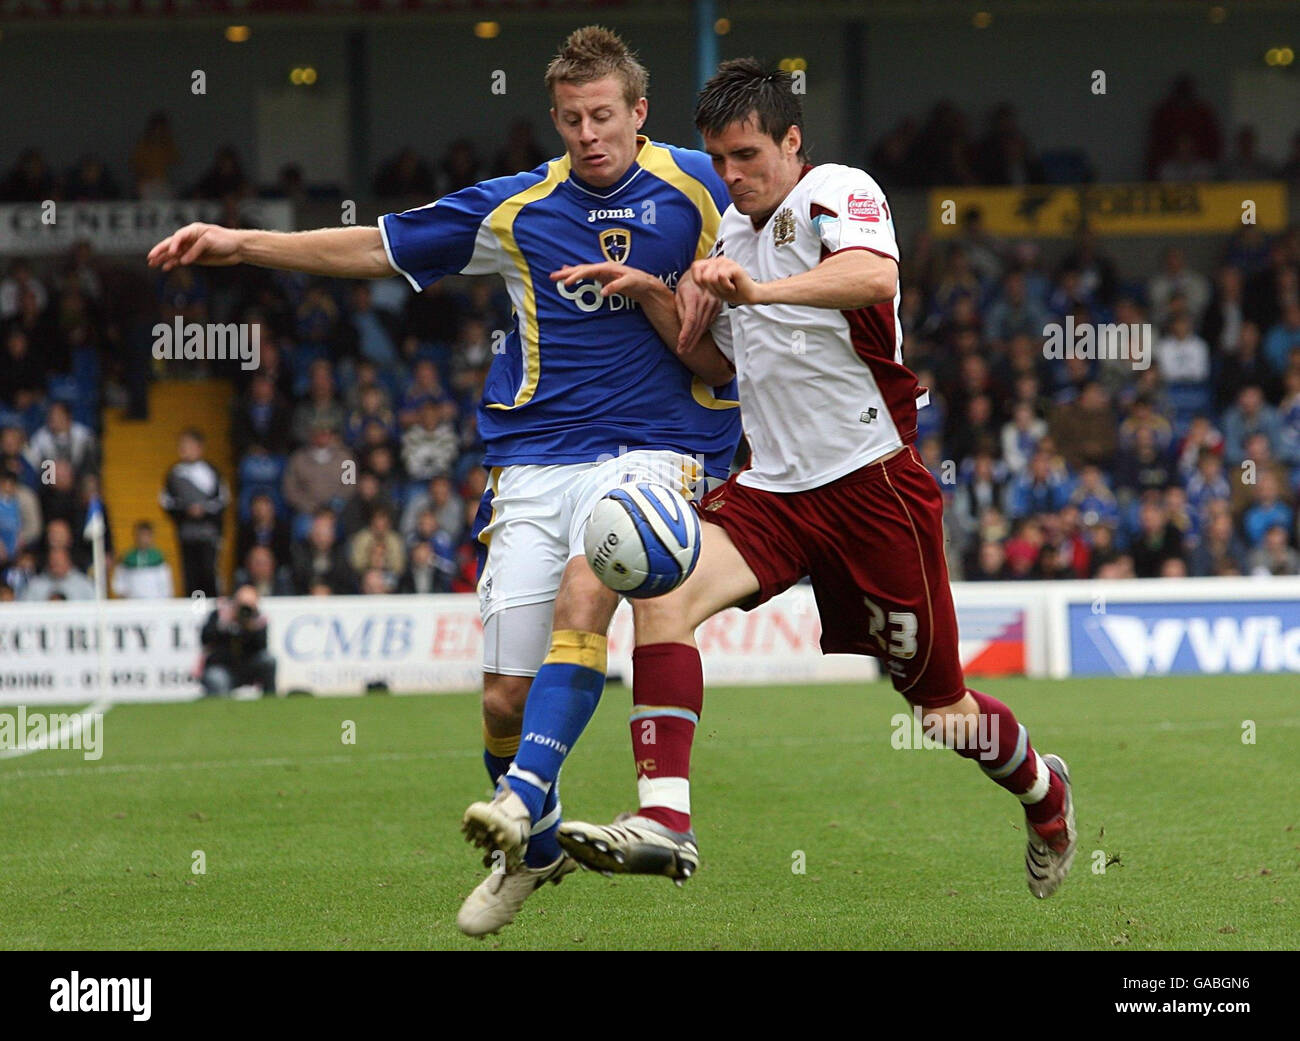 Cardiff City's Paul Parry (left) and Burnley's Stephen Jordan battle for the ball during the Coca-Cola Championship match at Ninian Park, Cardiff. Stock Photo